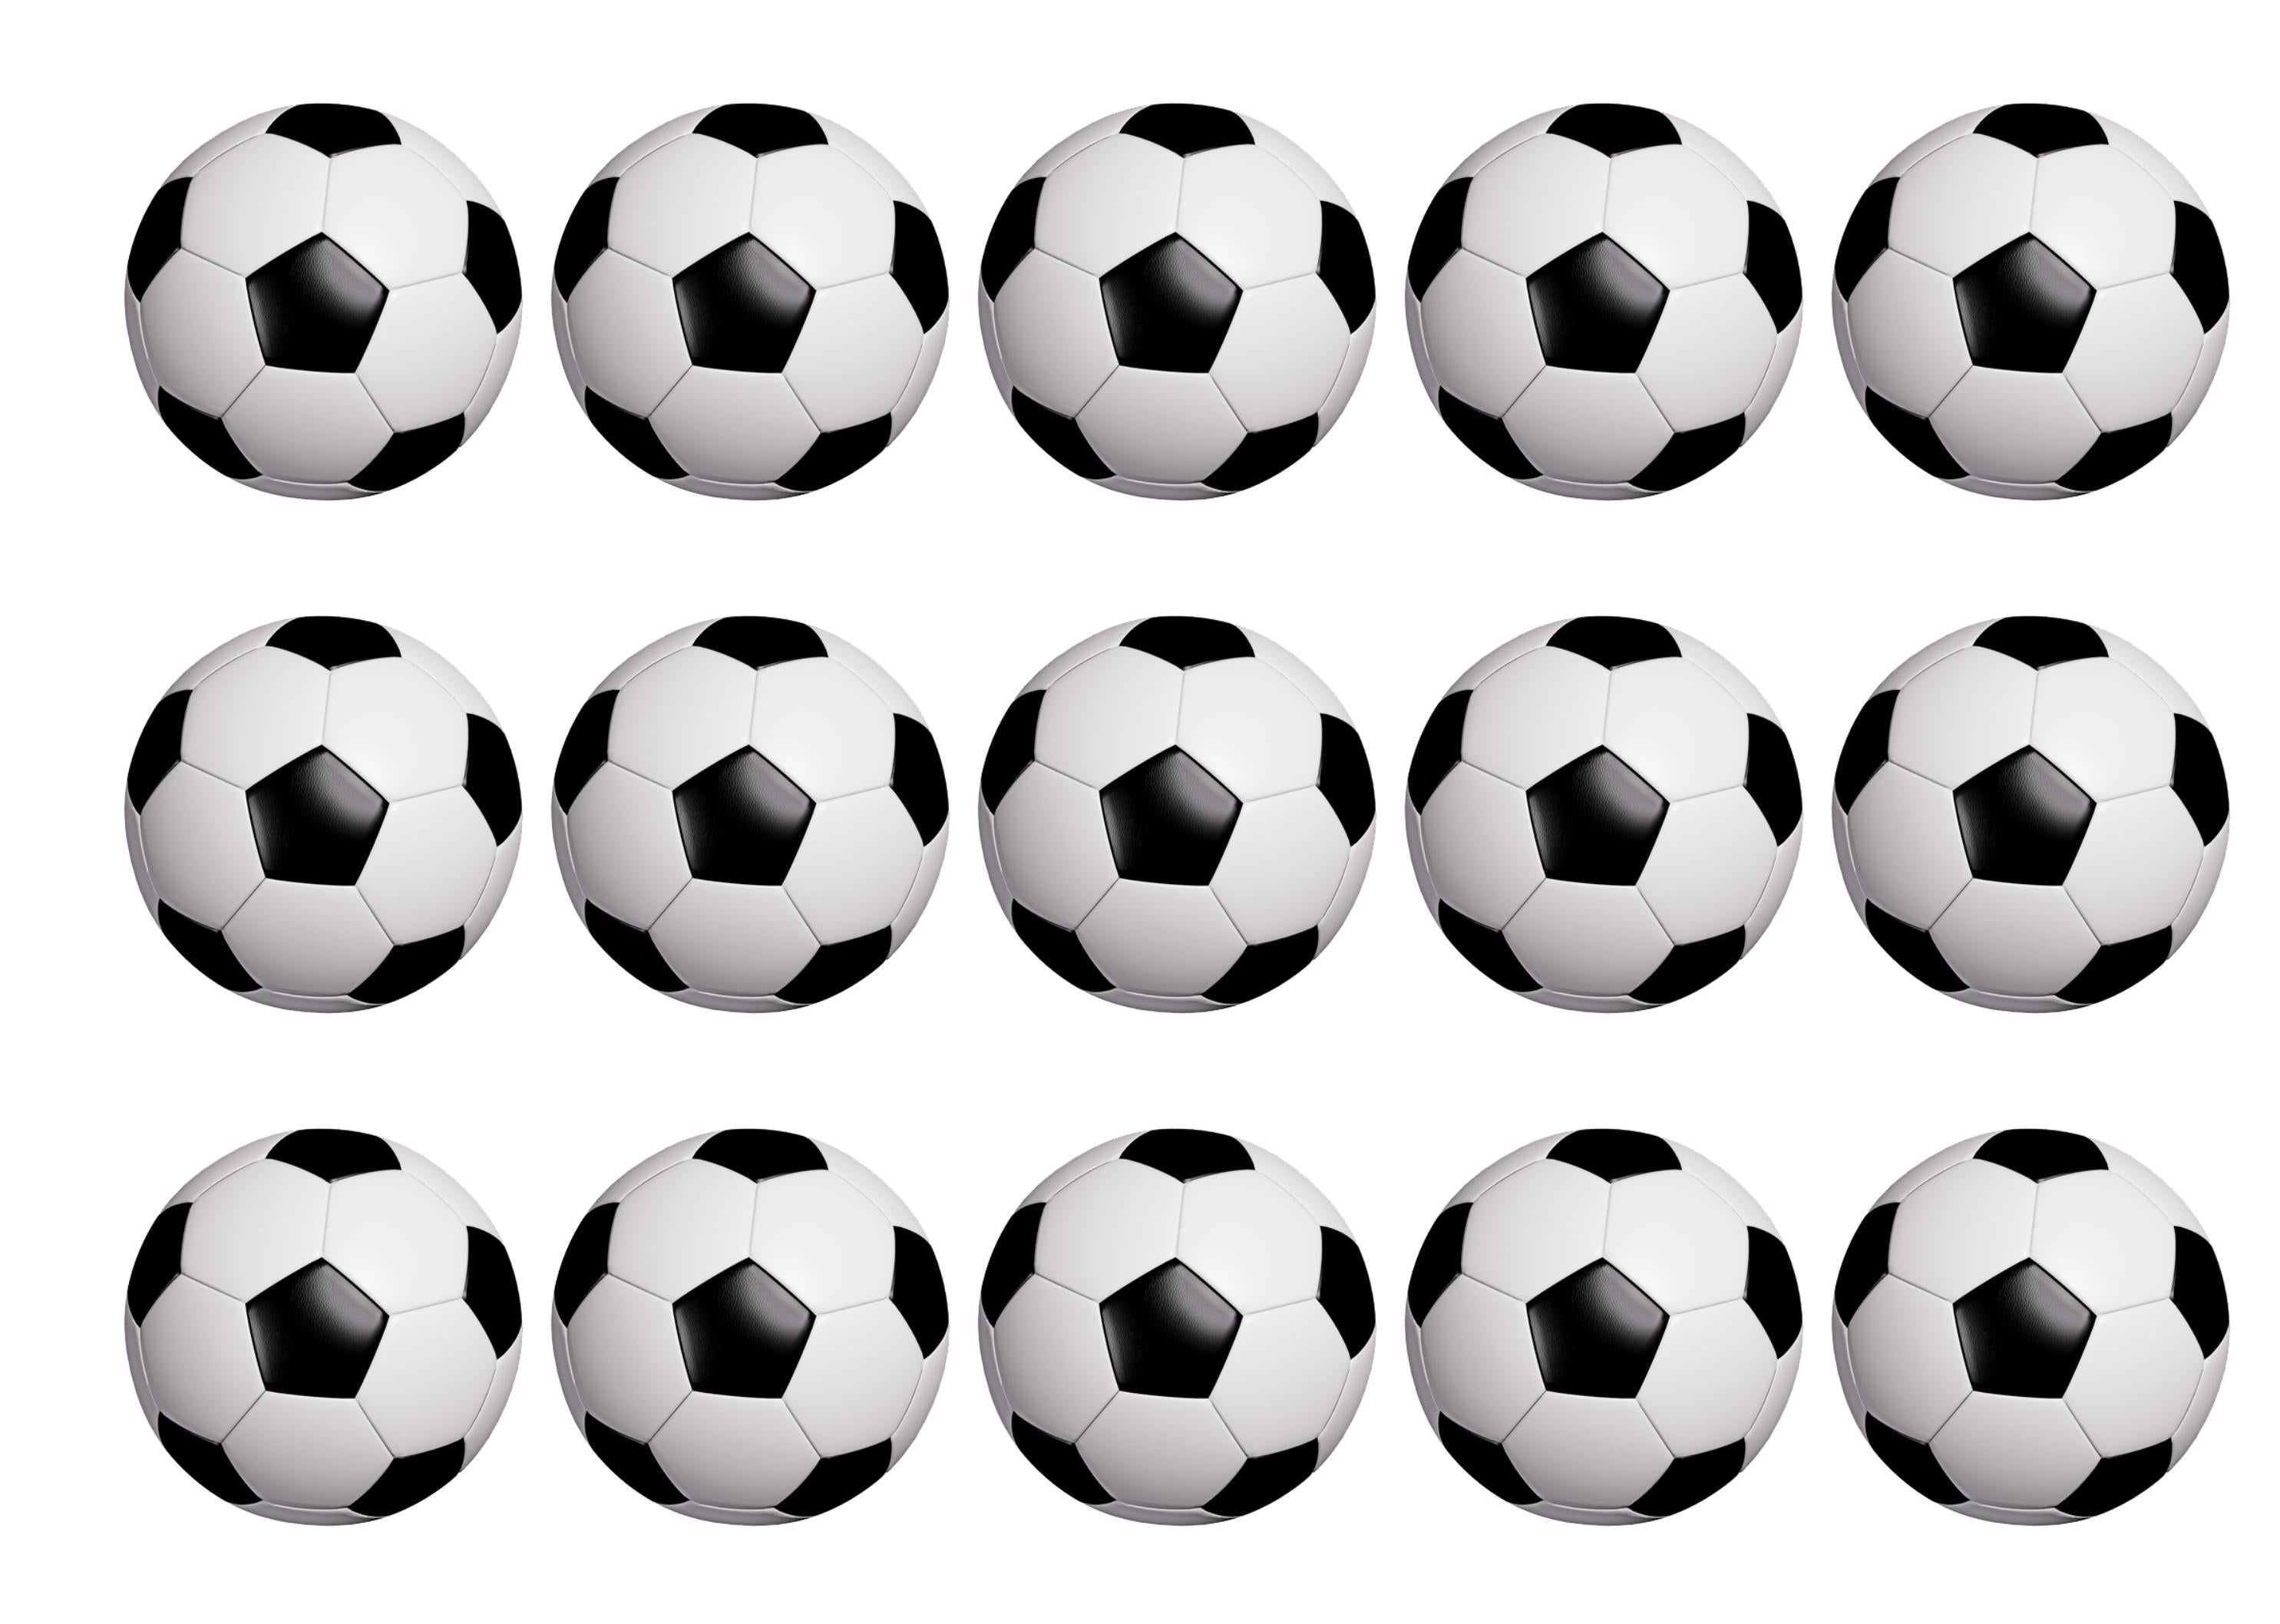 Soccer Ball Cake Topper with TEMPLATES for MANY SIZES | Football Cake | Soccer  Ball Cake - YouTube